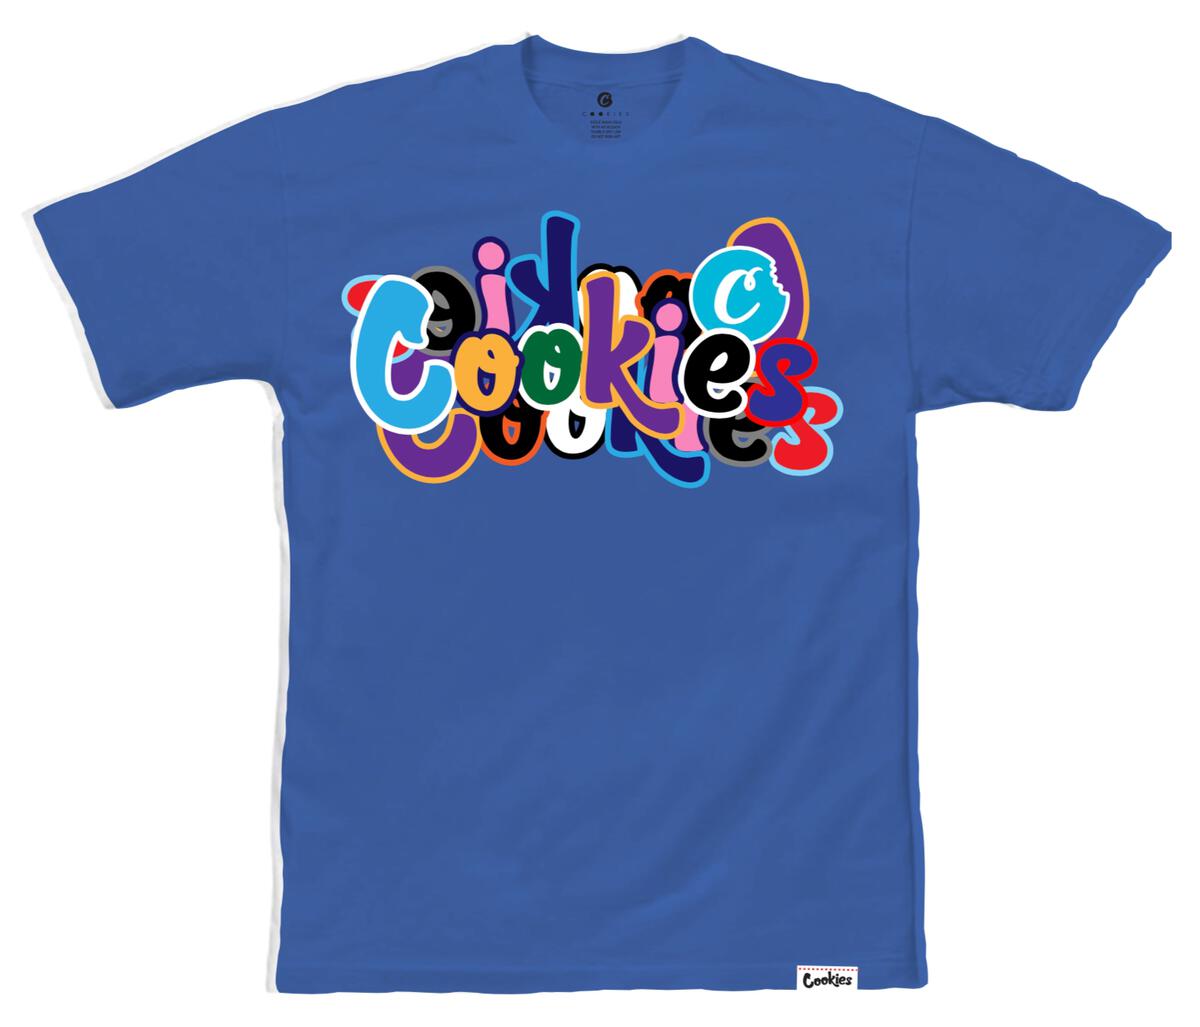 Cookies - Infamous Logo Tee - Royal Blue - 1560T6031